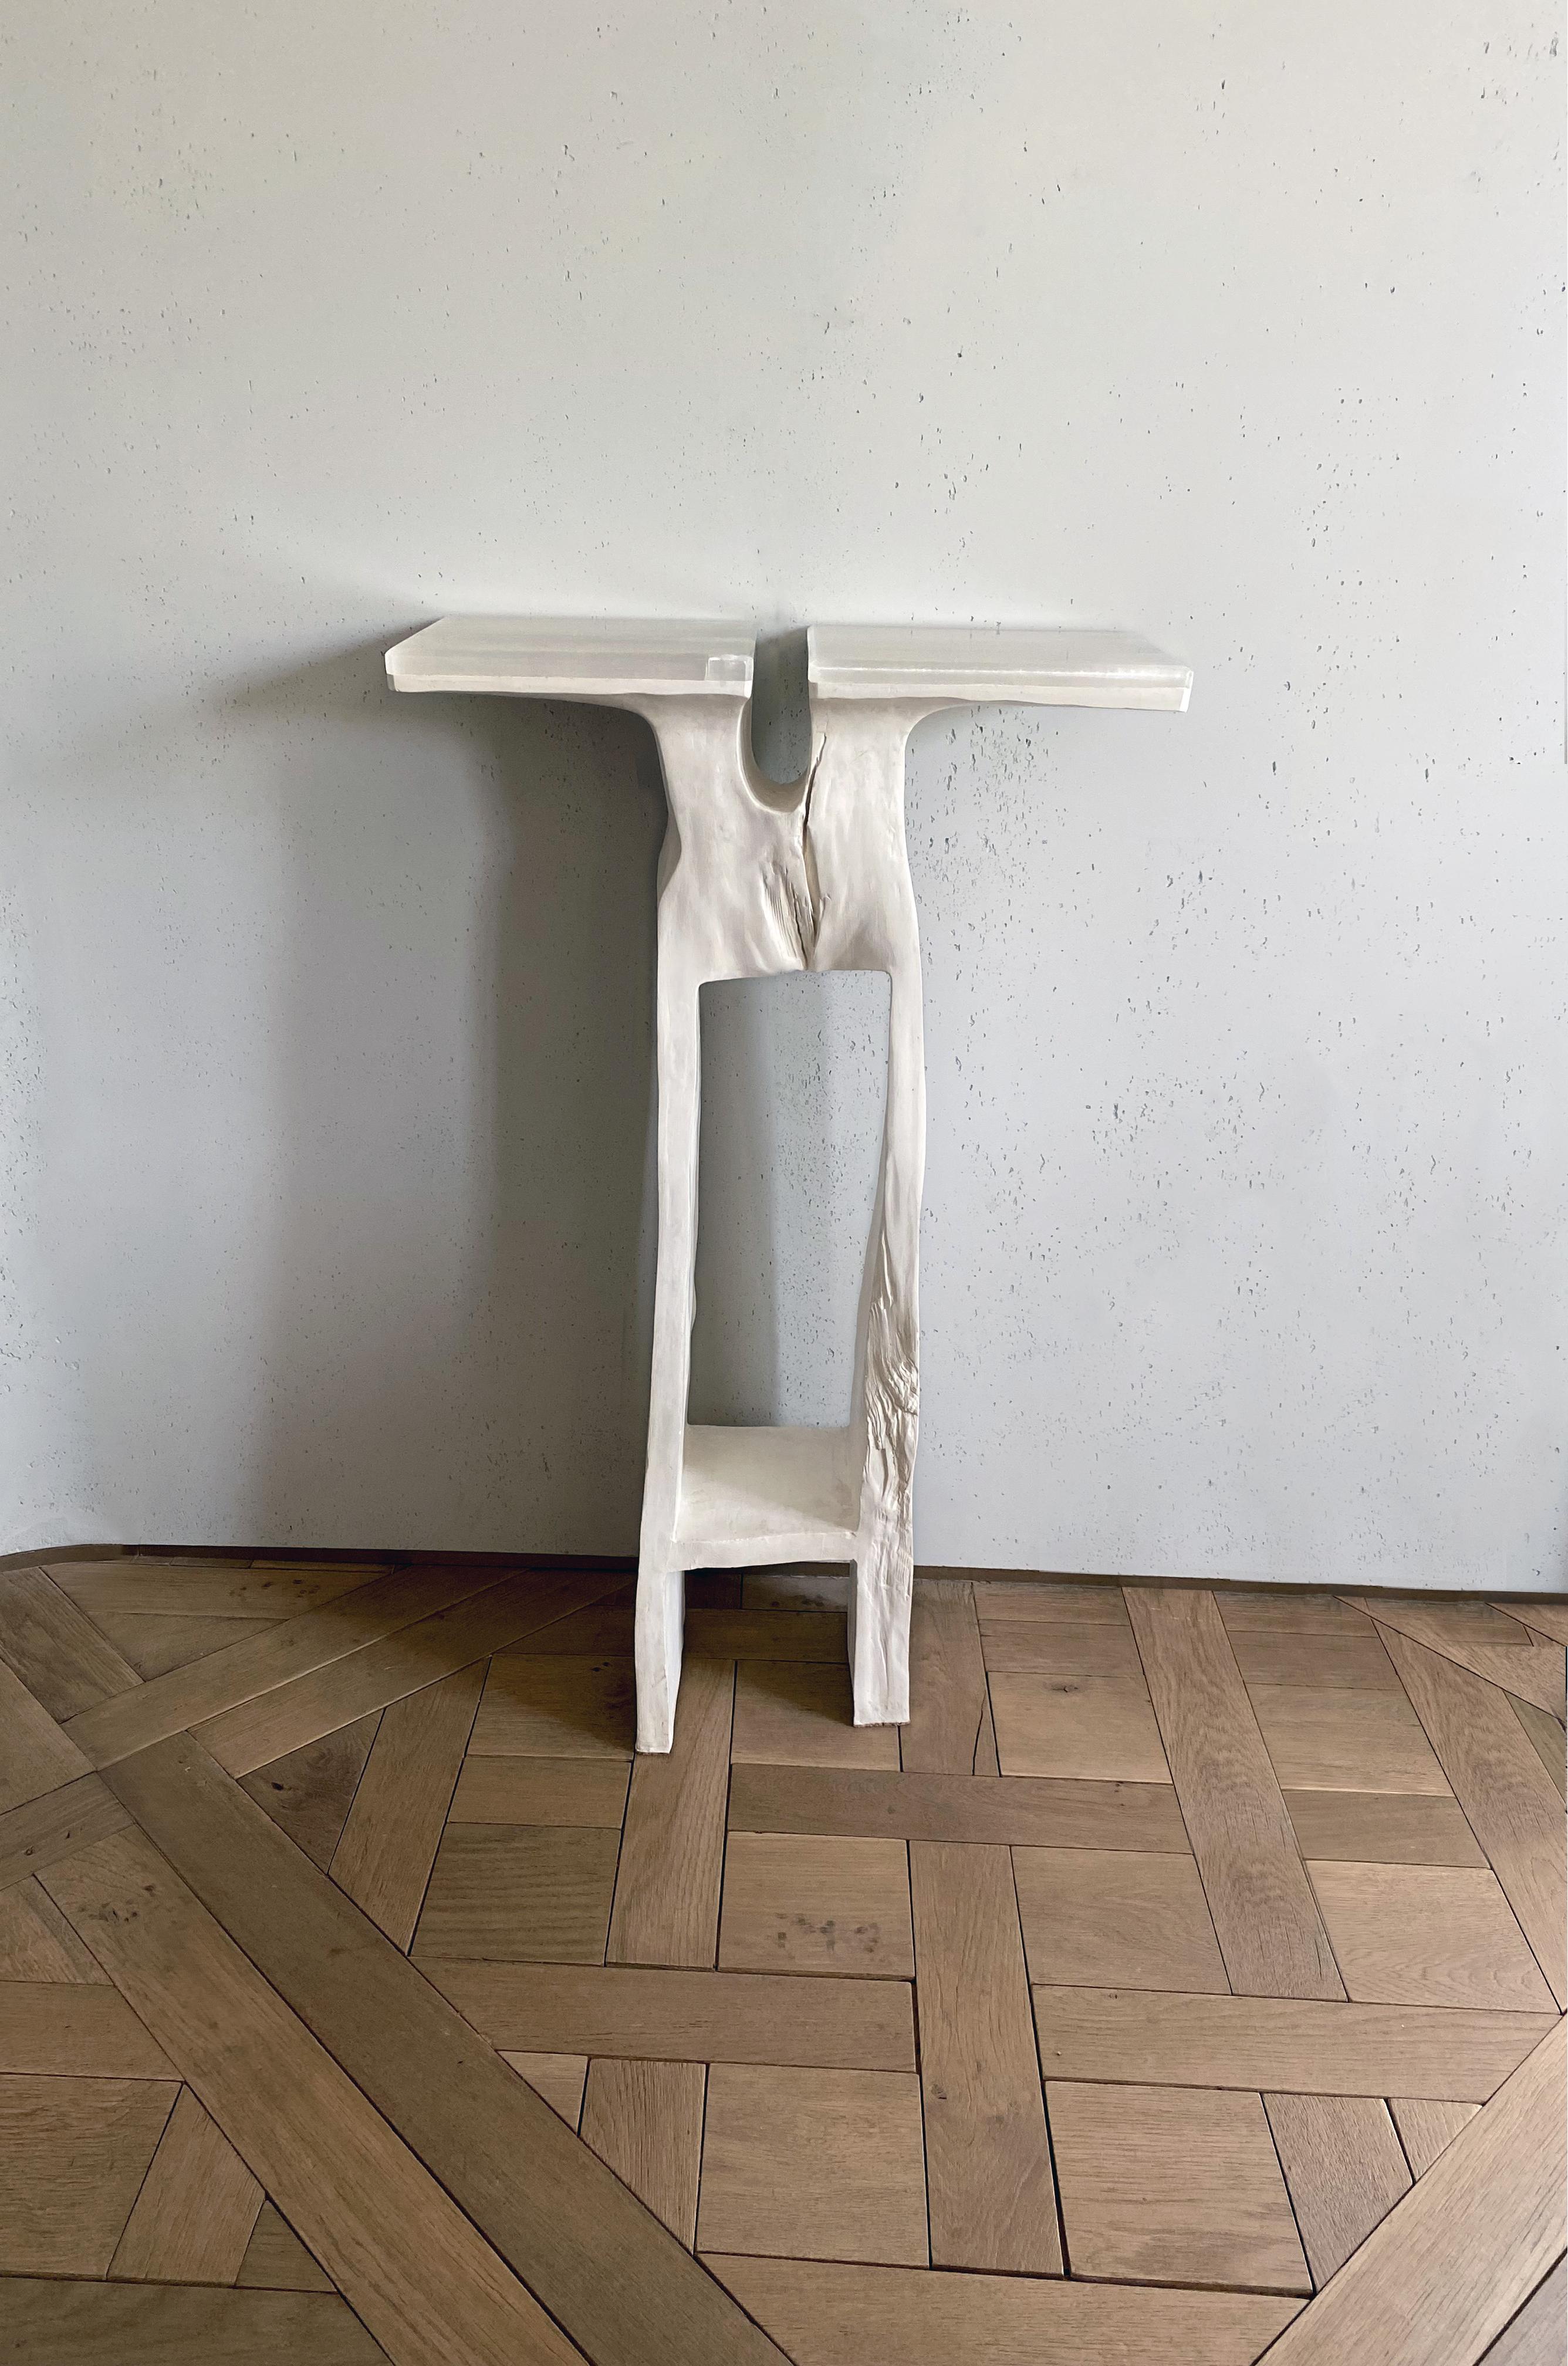 21st century console pedestal Atlante by Adrien Coroller

Gypsum
Customizable
Numeroted /8, signed and delivered with a certificate of authenticity

The tray and the base are directly cut with and around the defects of a pear tree log. The Atlantean